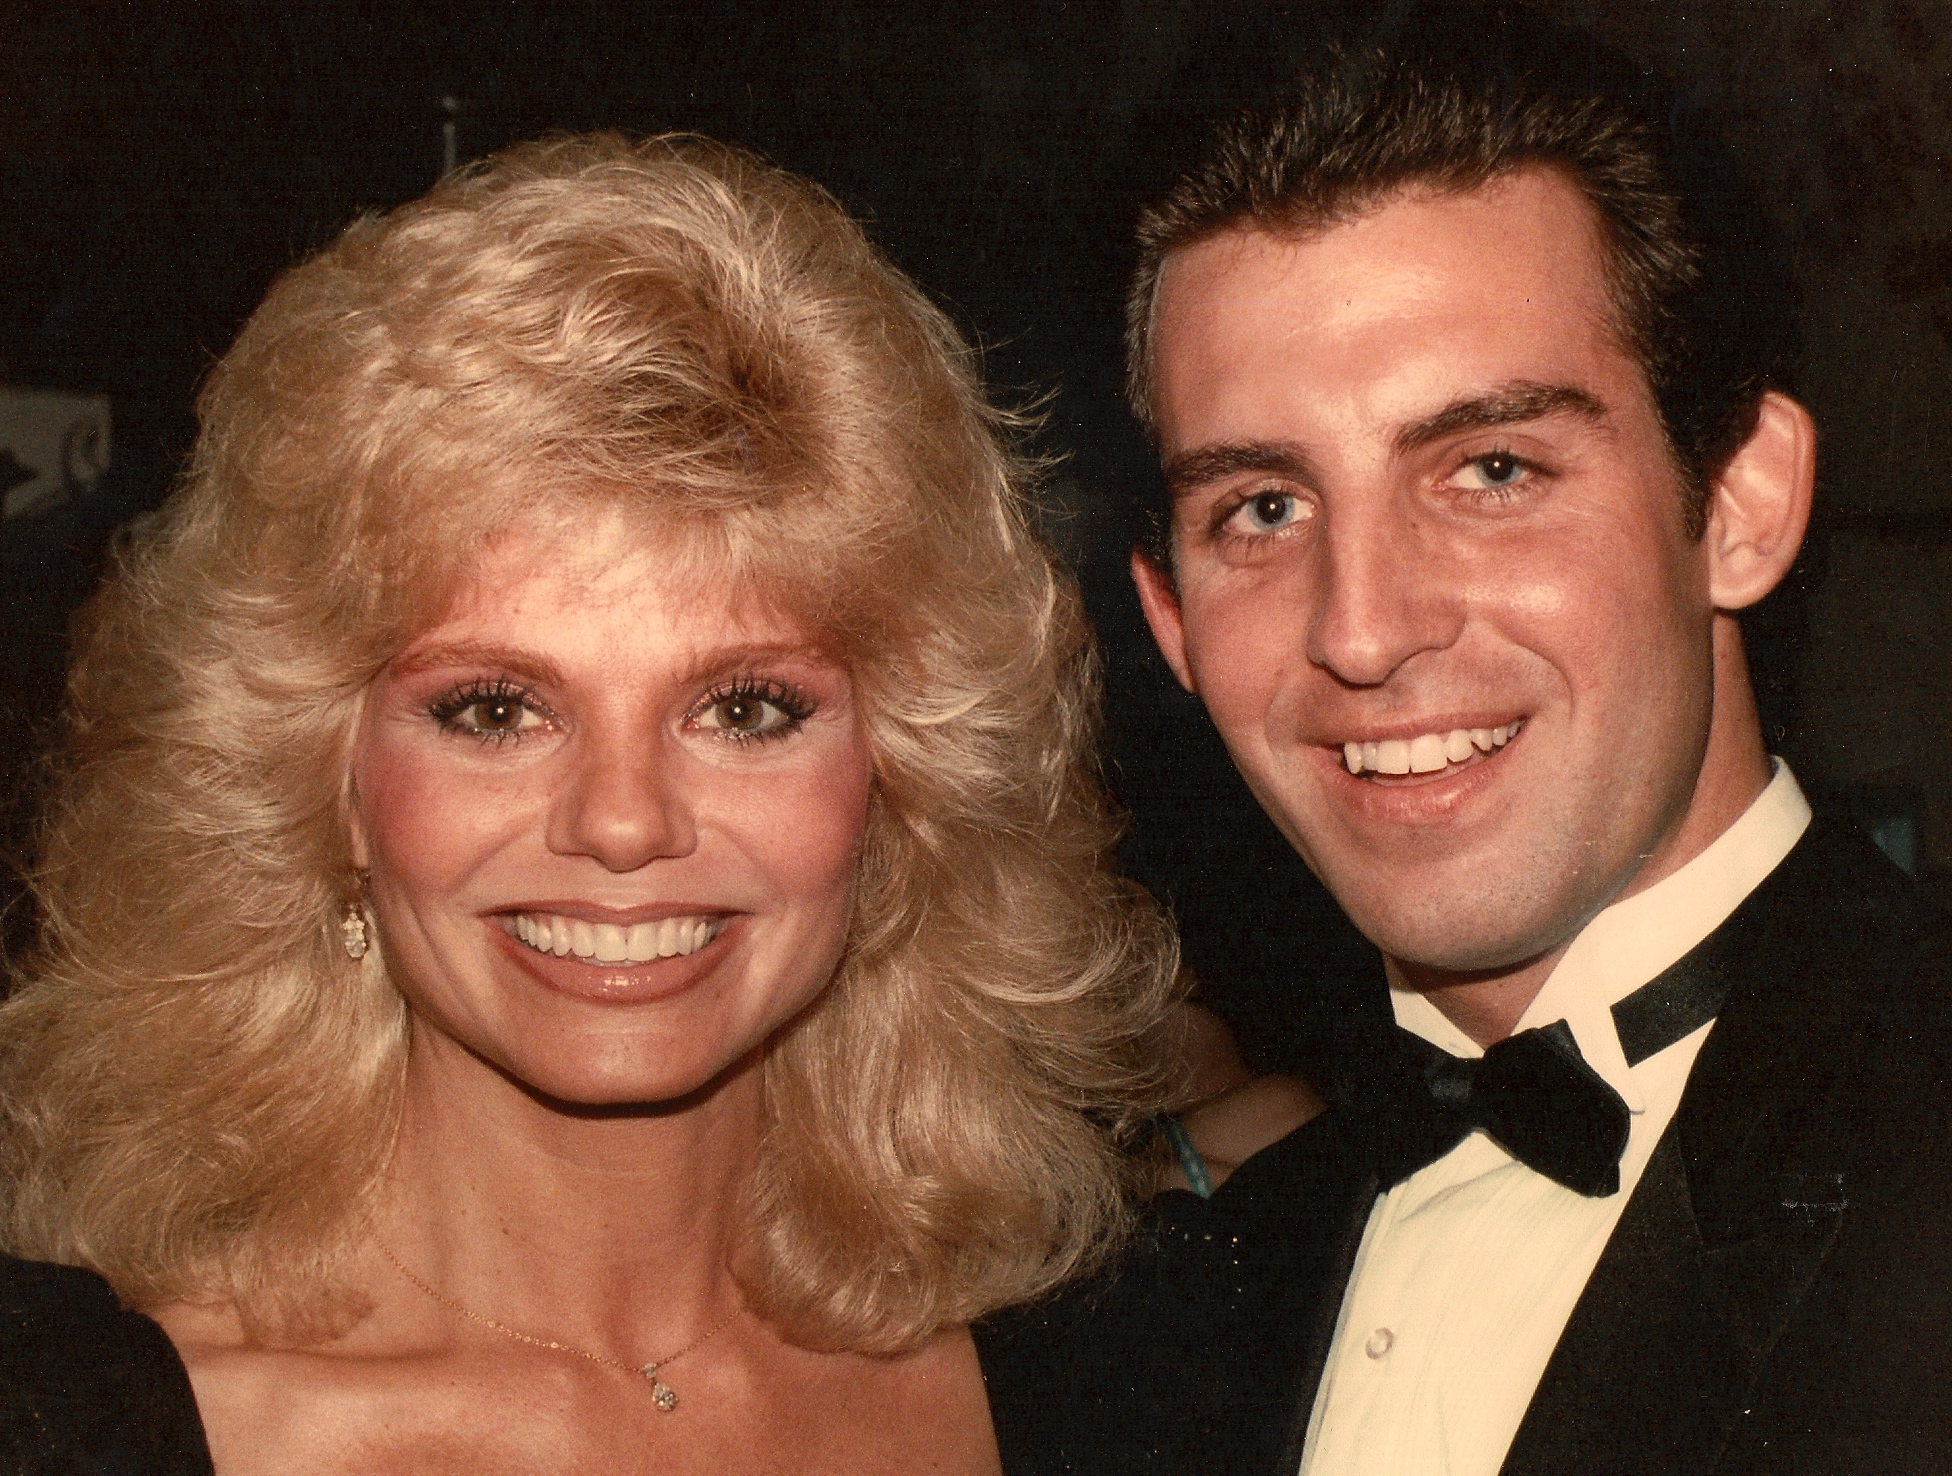 Loni Anderson and Mark Fauser